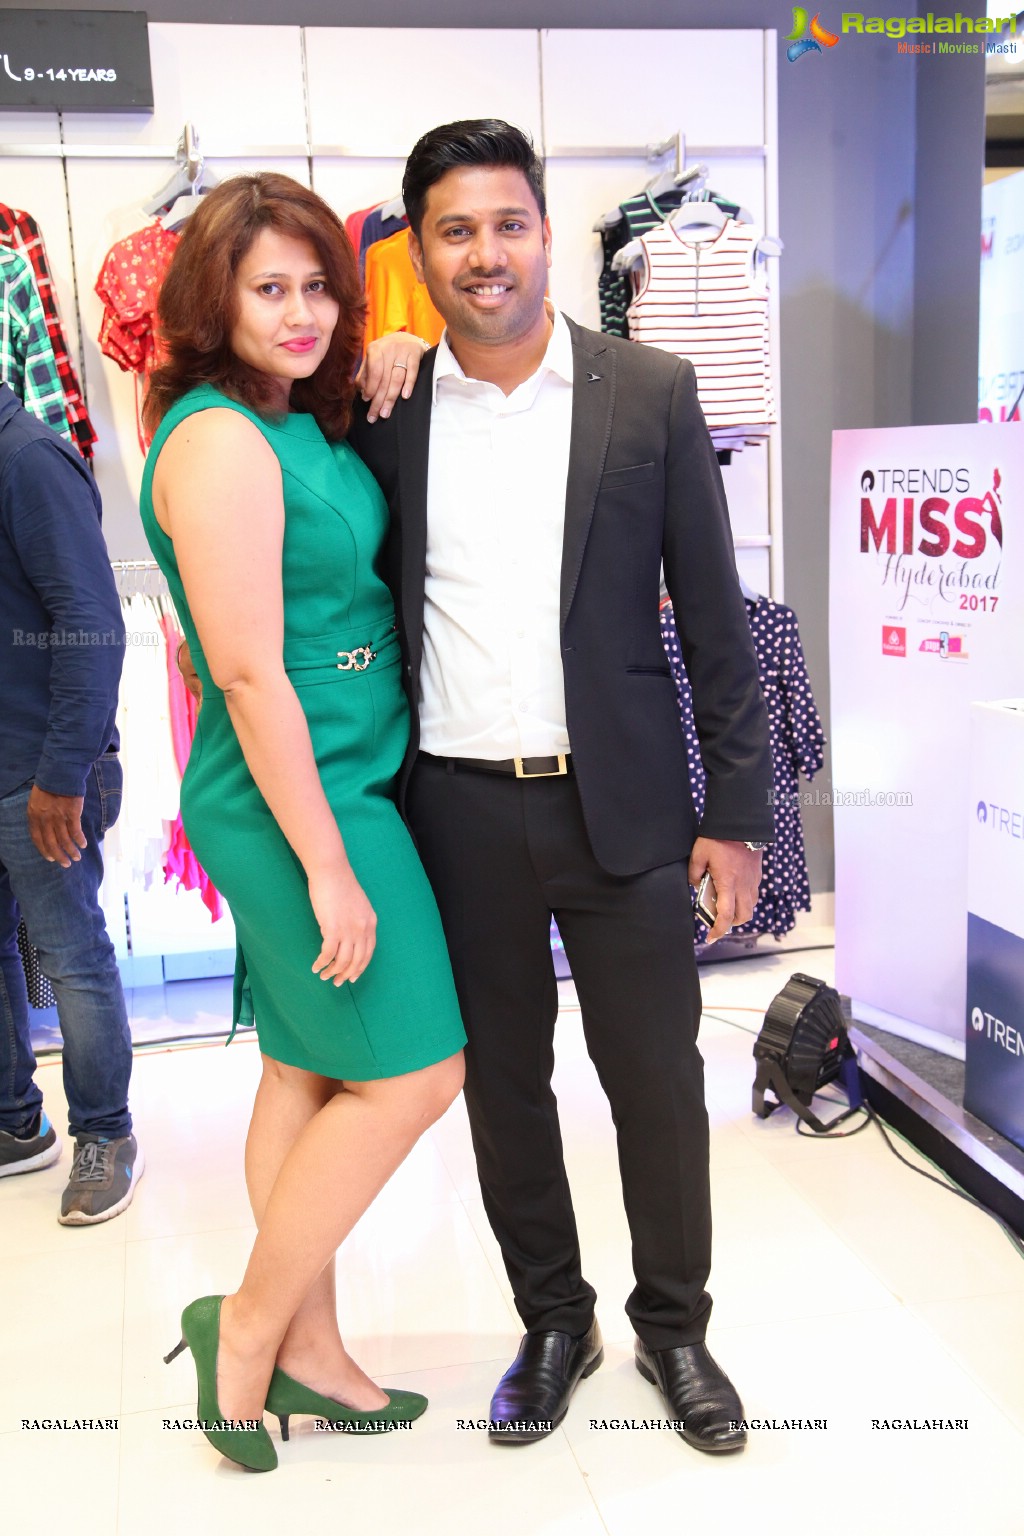 Trends Miss Hyderabad 2017 Launch by Page 3 Entertainments at Reliance Trends